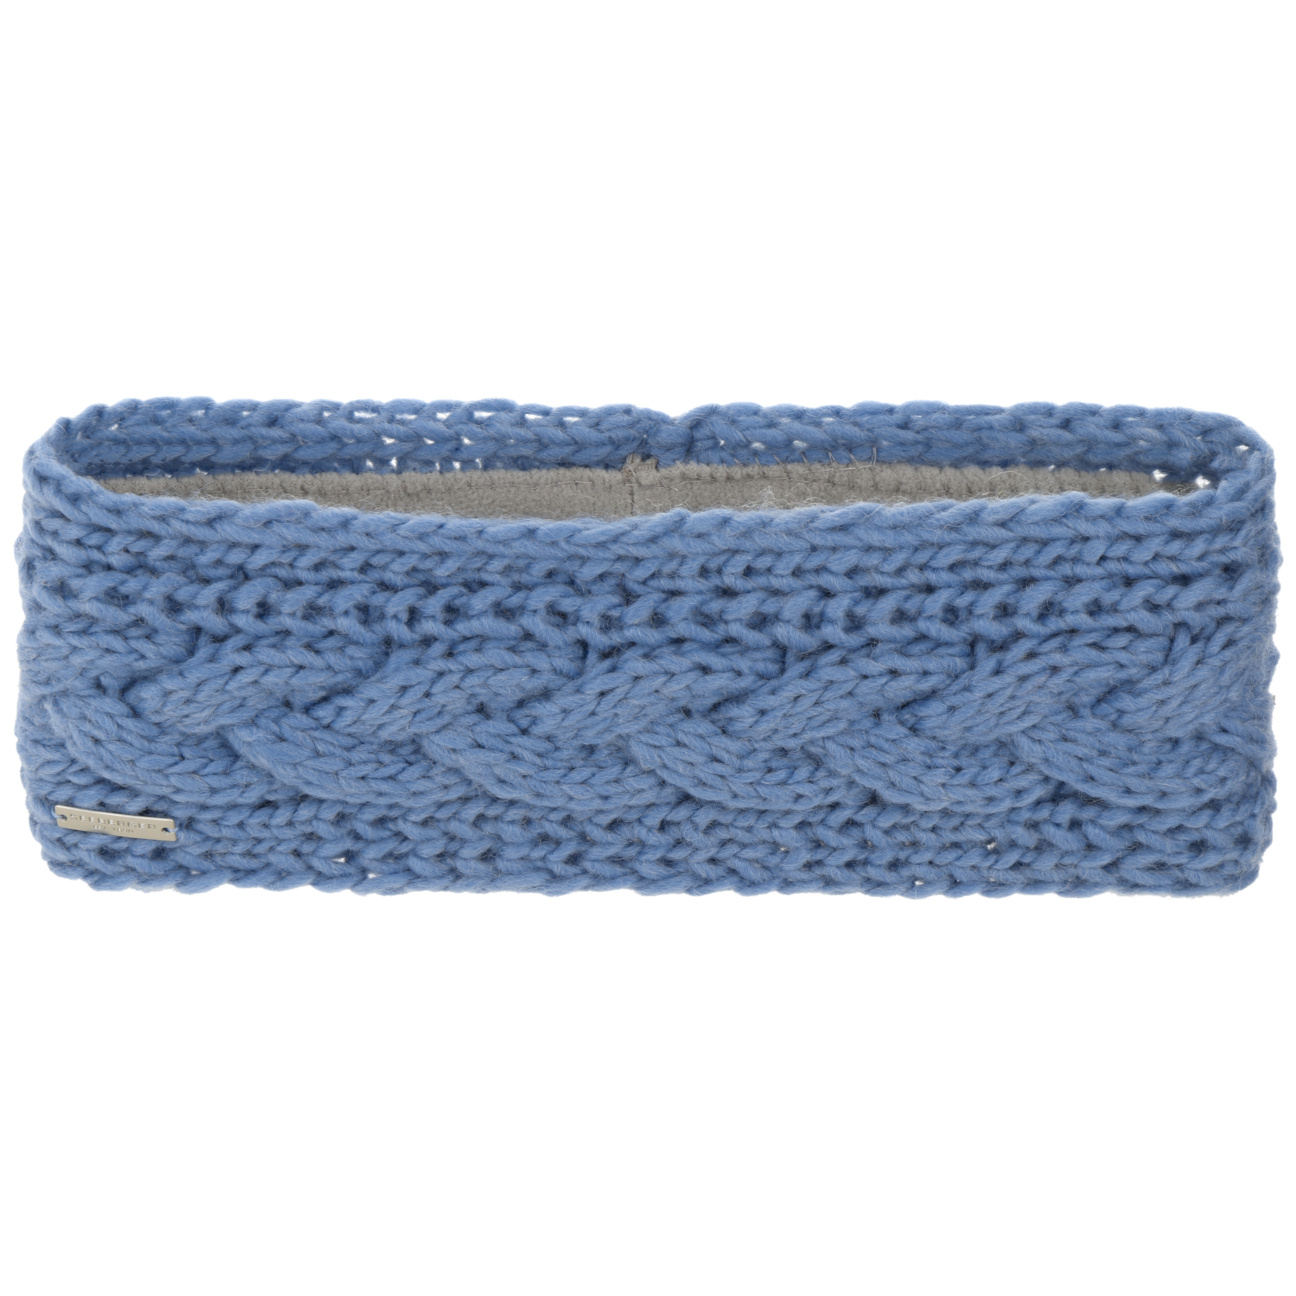 € Seeberger Cable Classic Strick-Stirnband | 19,95 Knit by